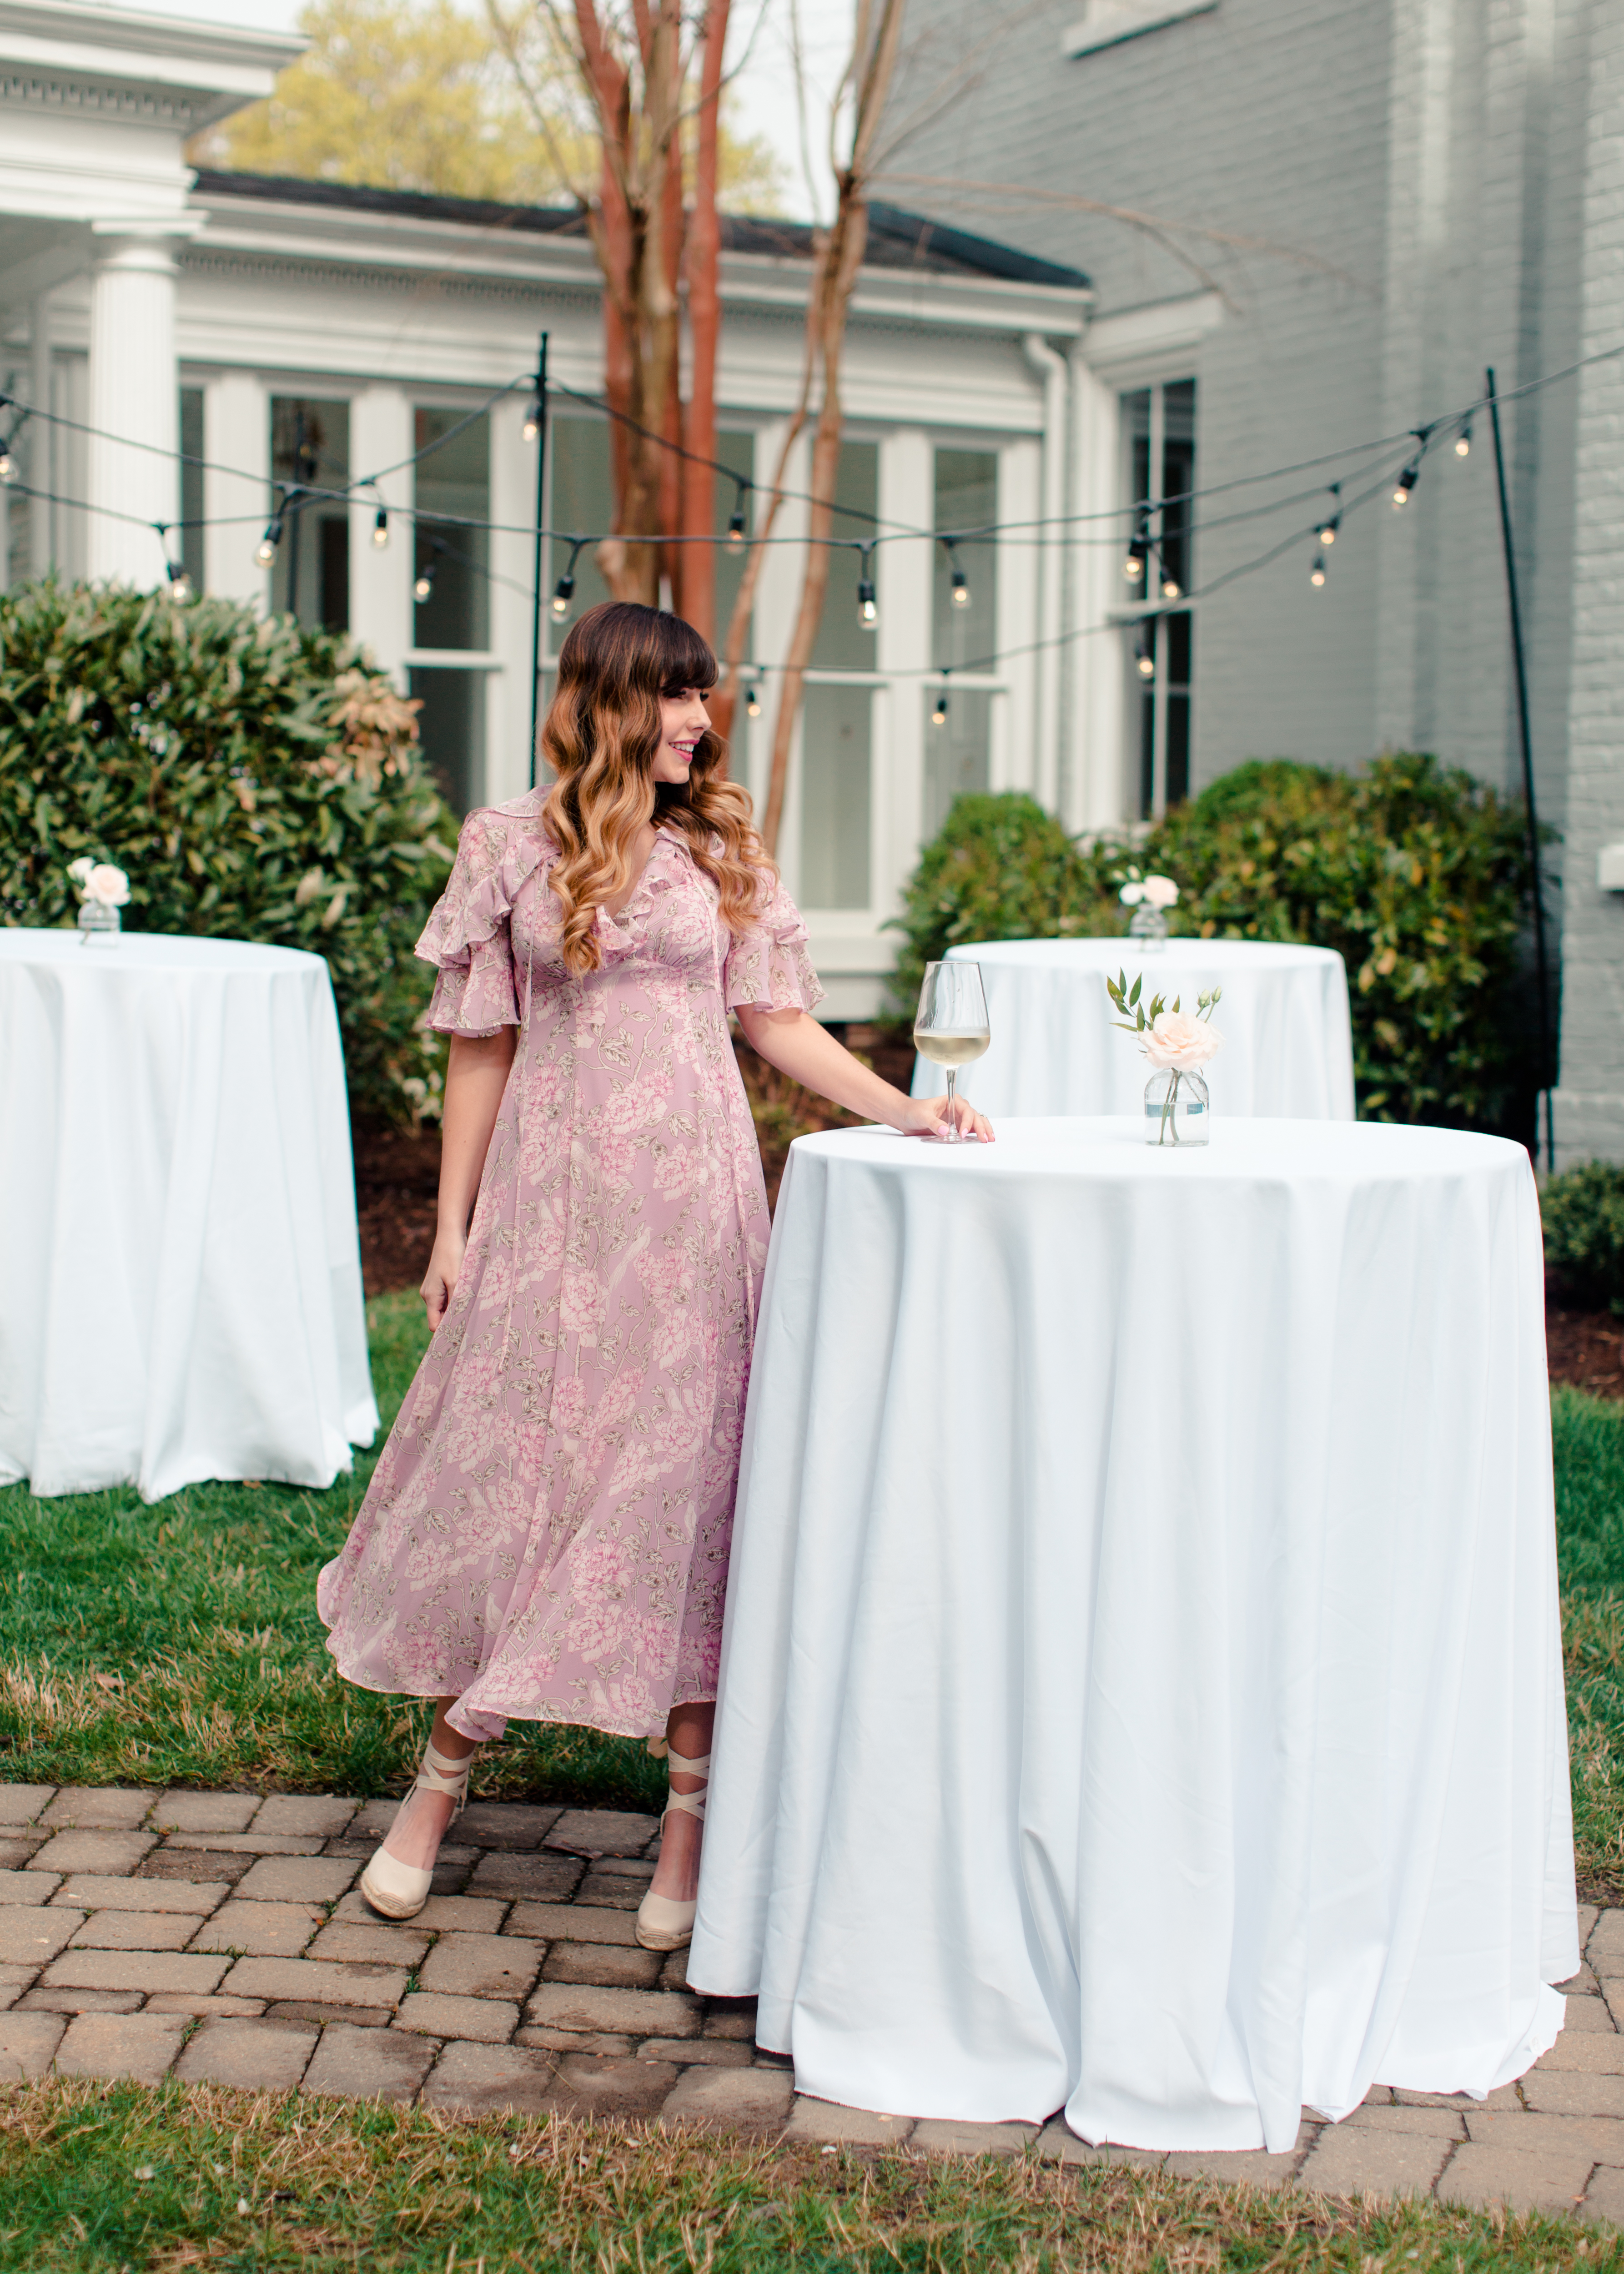 What to wear to a spring wedding with Frapps & Frills and Gal Meets Glam at Greensboro, NC wedding & event venue, The McAlister-Leftwich House